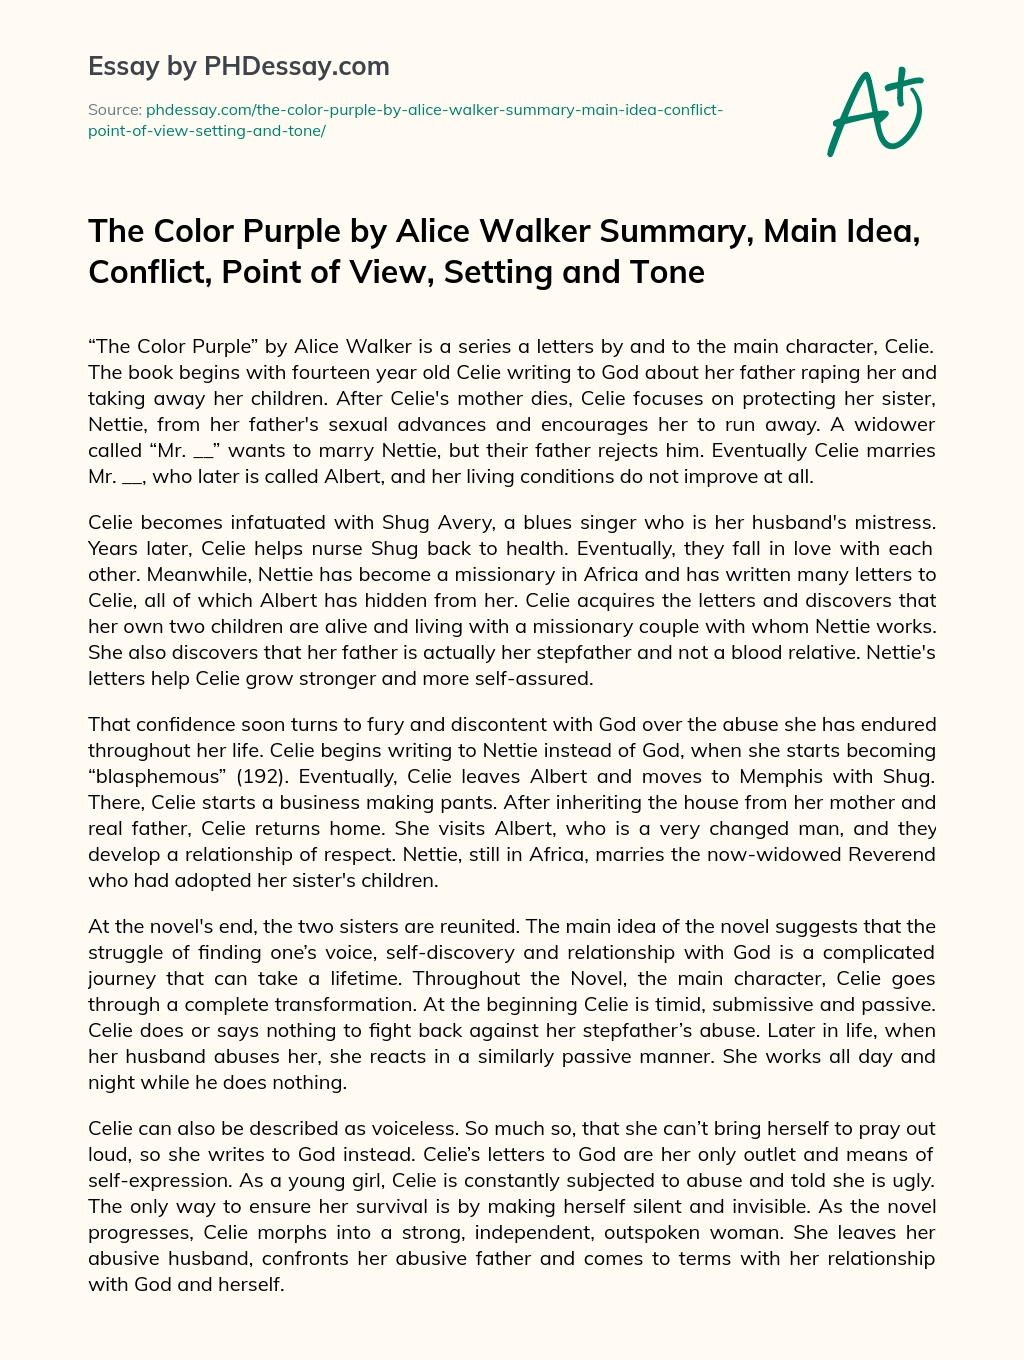 Реферат: A Summary Of The Color Purple Essay